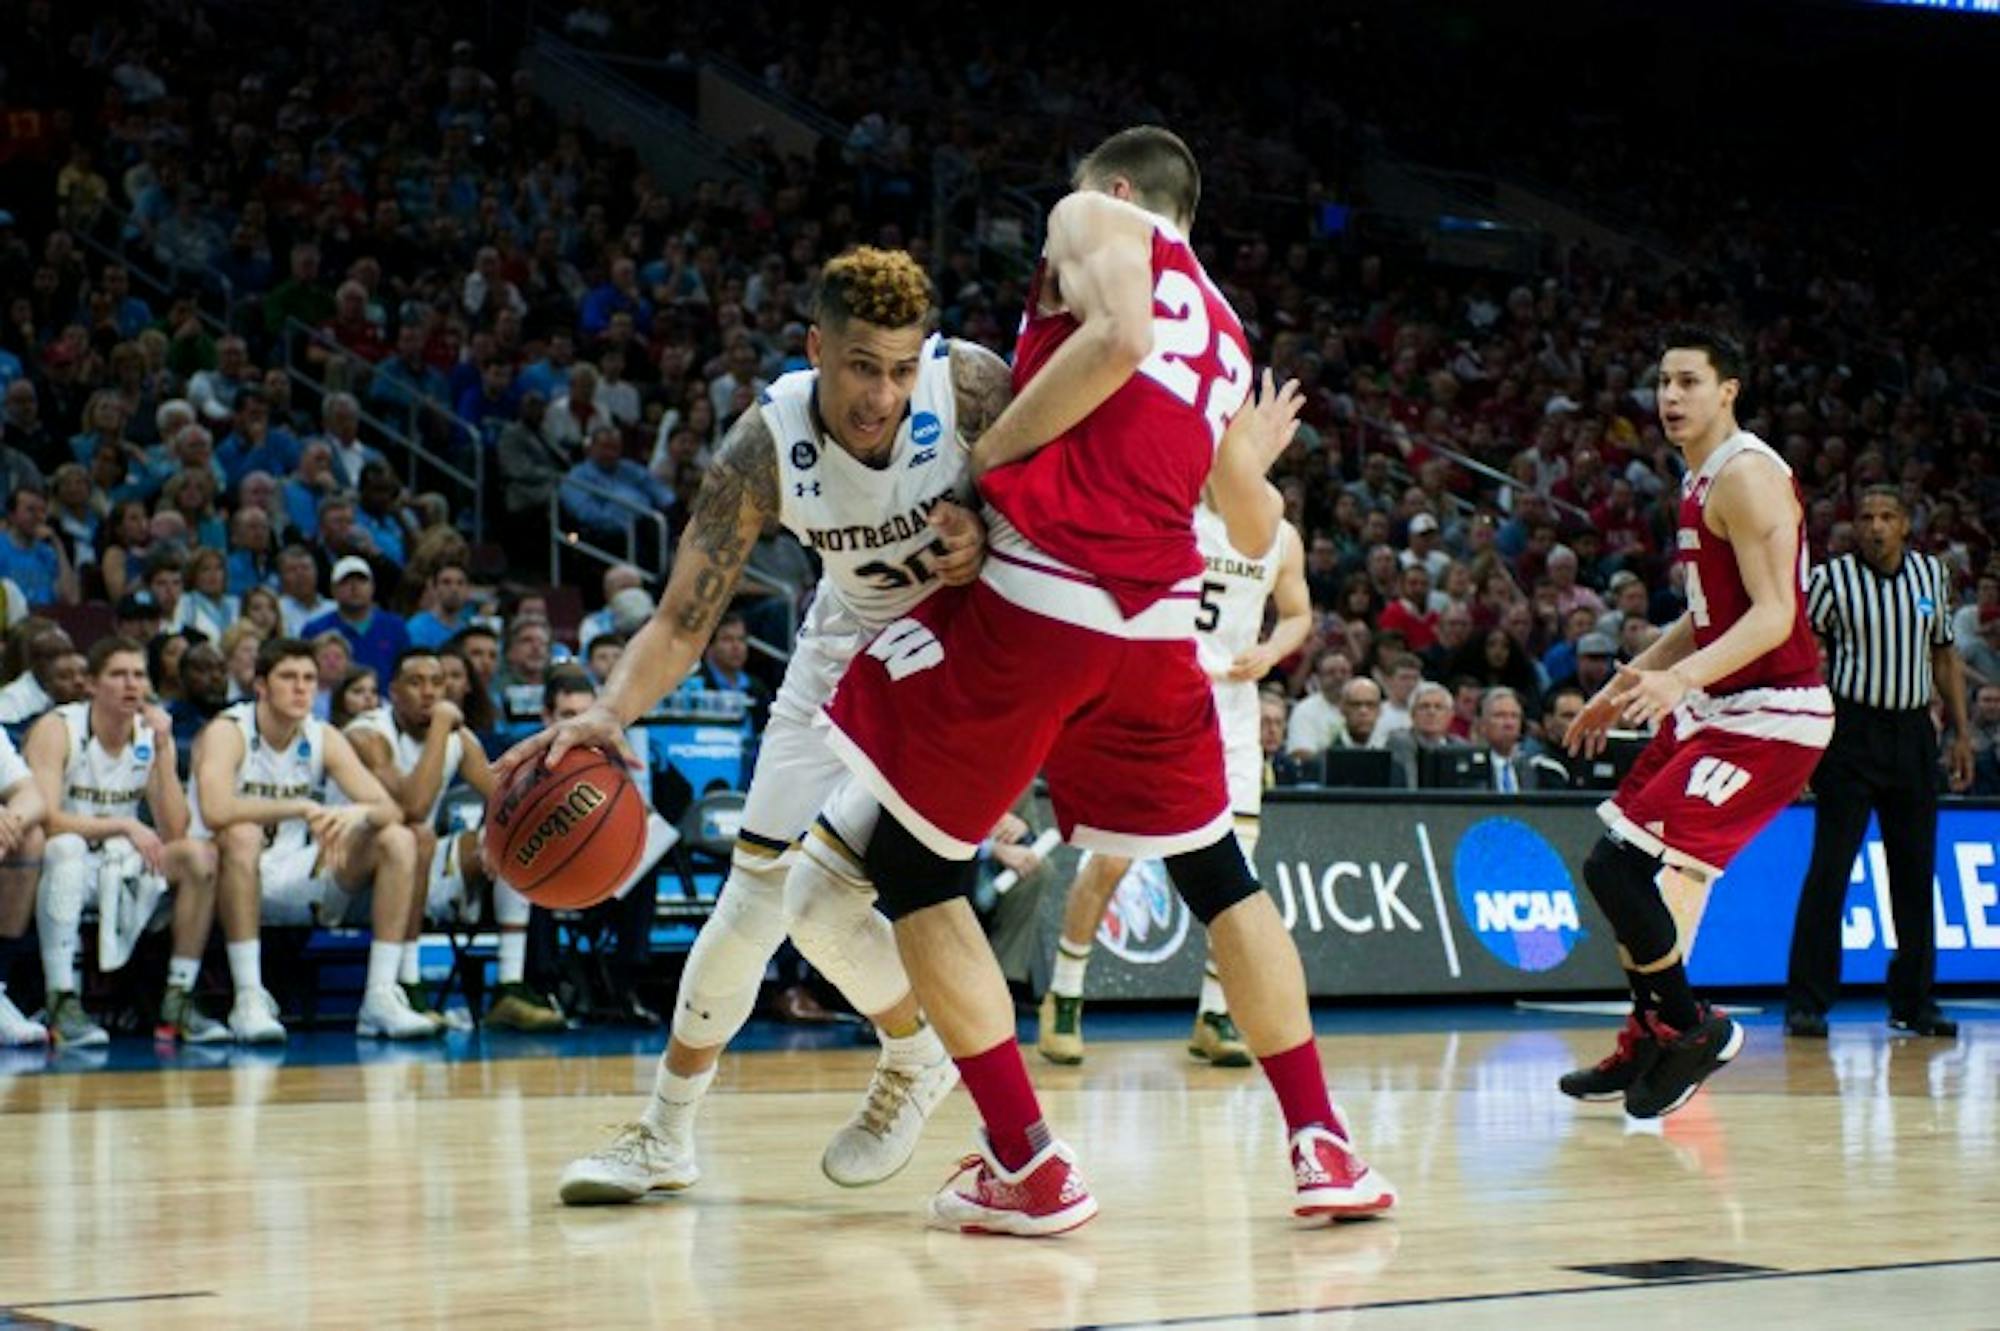 Irish senior forward Zach Auguste looks to score during Notre Dame’s 61-56 win over Wisconsin on March 25.